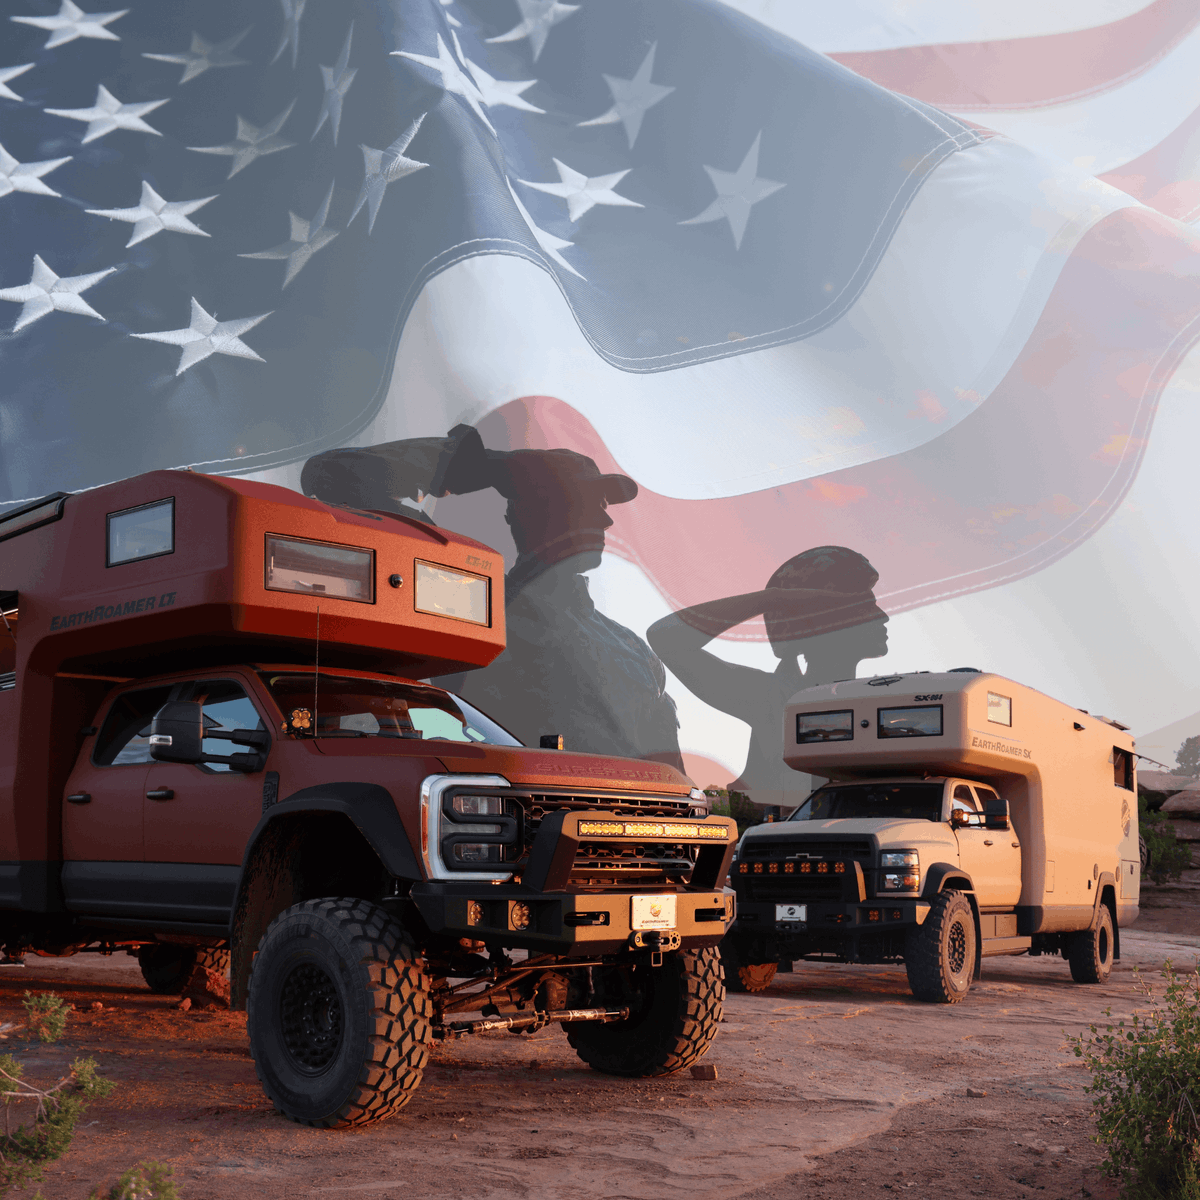 'Home of the free, because of the brave.' — On this Memorial Day, we pause our adventures to solemnly honor the brave men and women who made the ultimate sacrifice for our freedoms and in defense of this great nation.